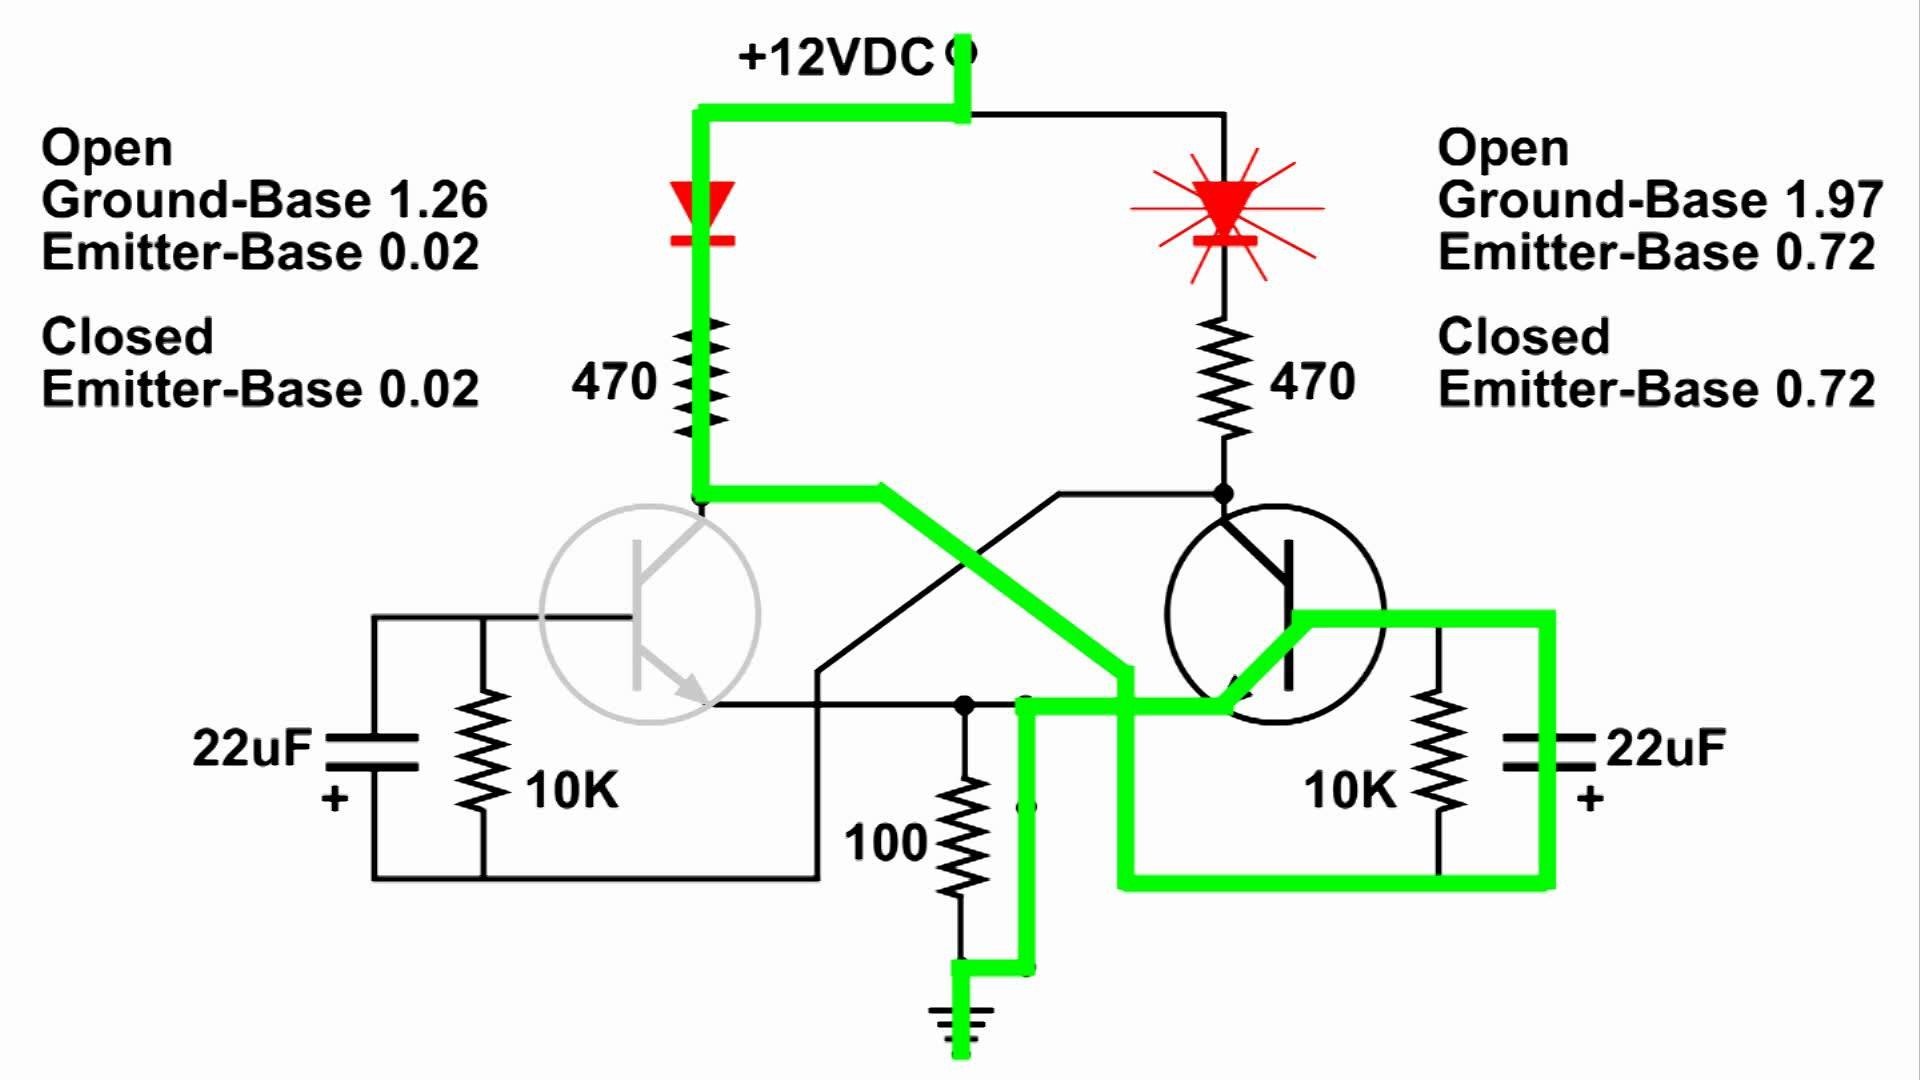 Flip Flop Circuit Build And Demo Youtube electric diagram online electrical diagrams explained